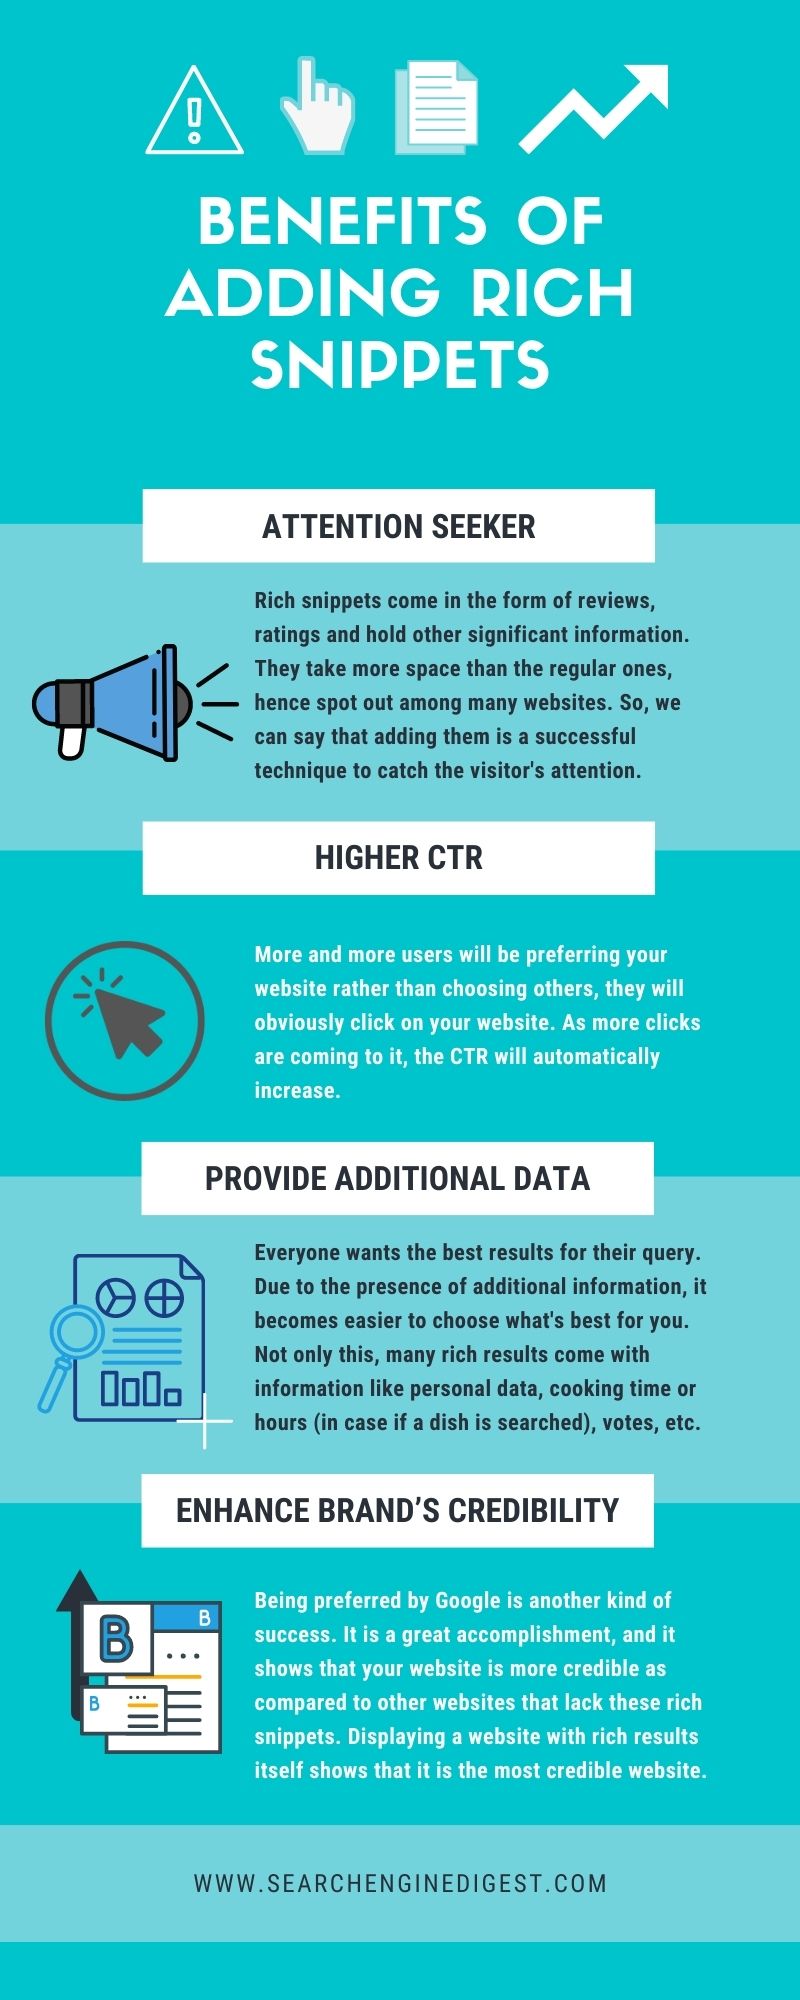 Benefits of Rich snippets